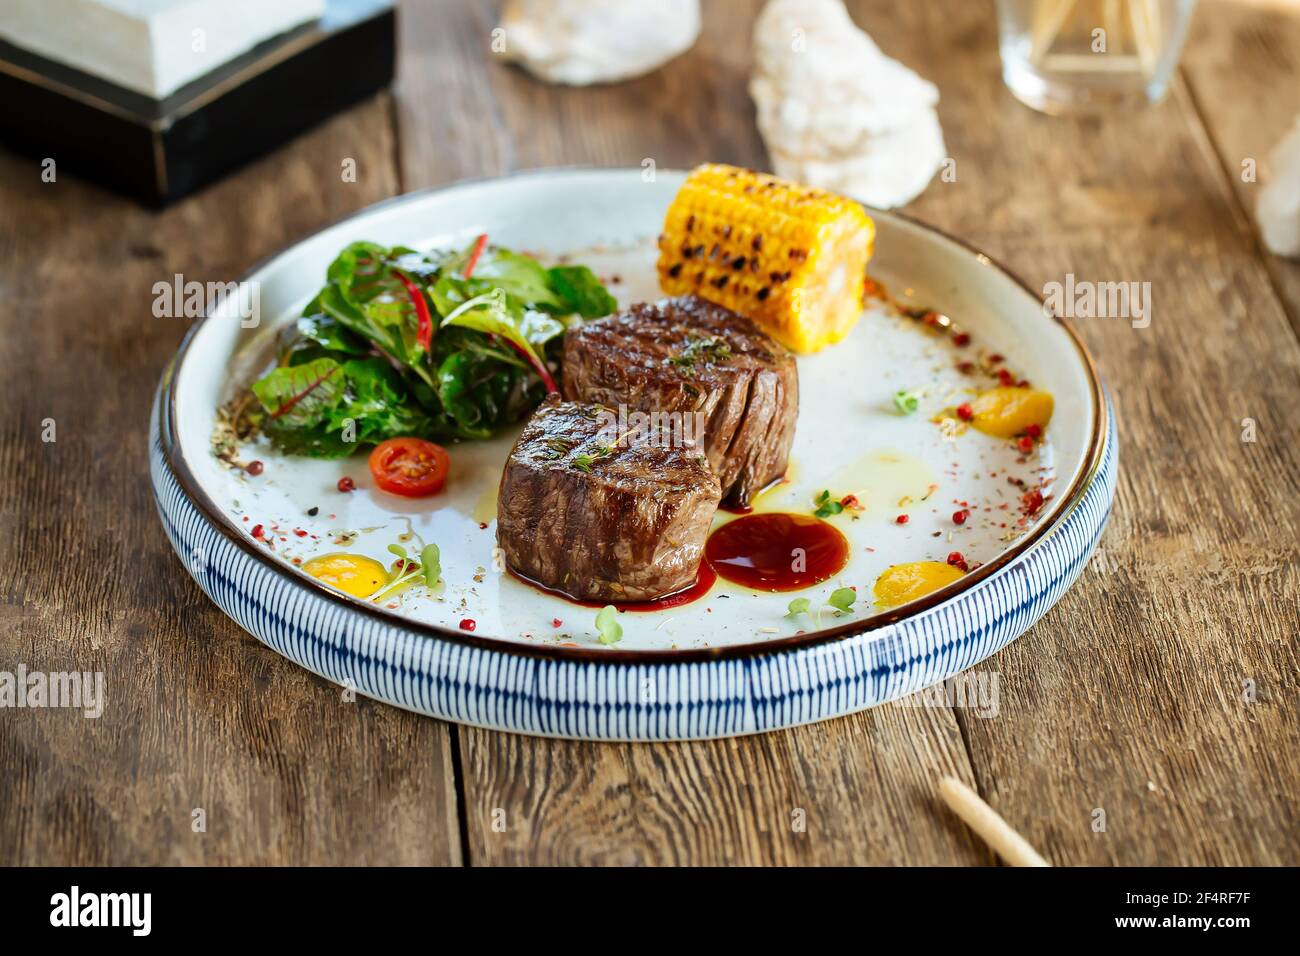 Grilled fillet mignon steaks with corn and salad Stock Photo